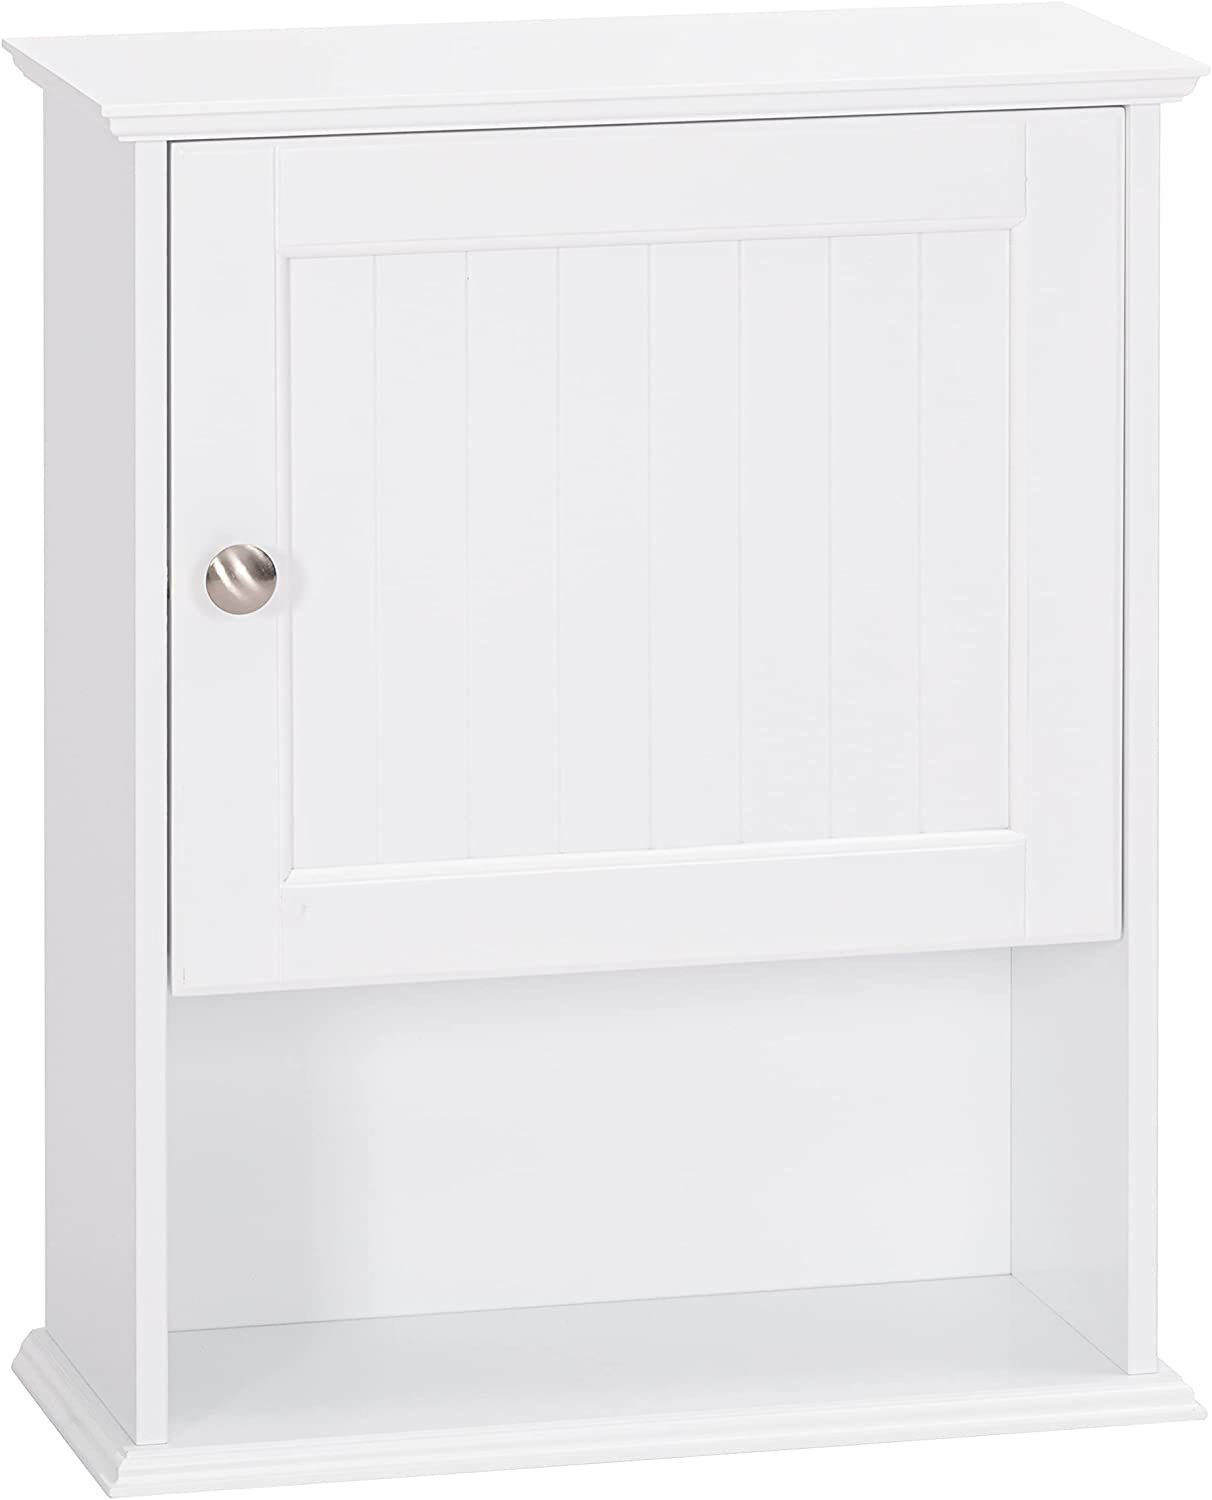 Spirich Bathroom Wall Cabinet with Glass Doors, Small Hanging